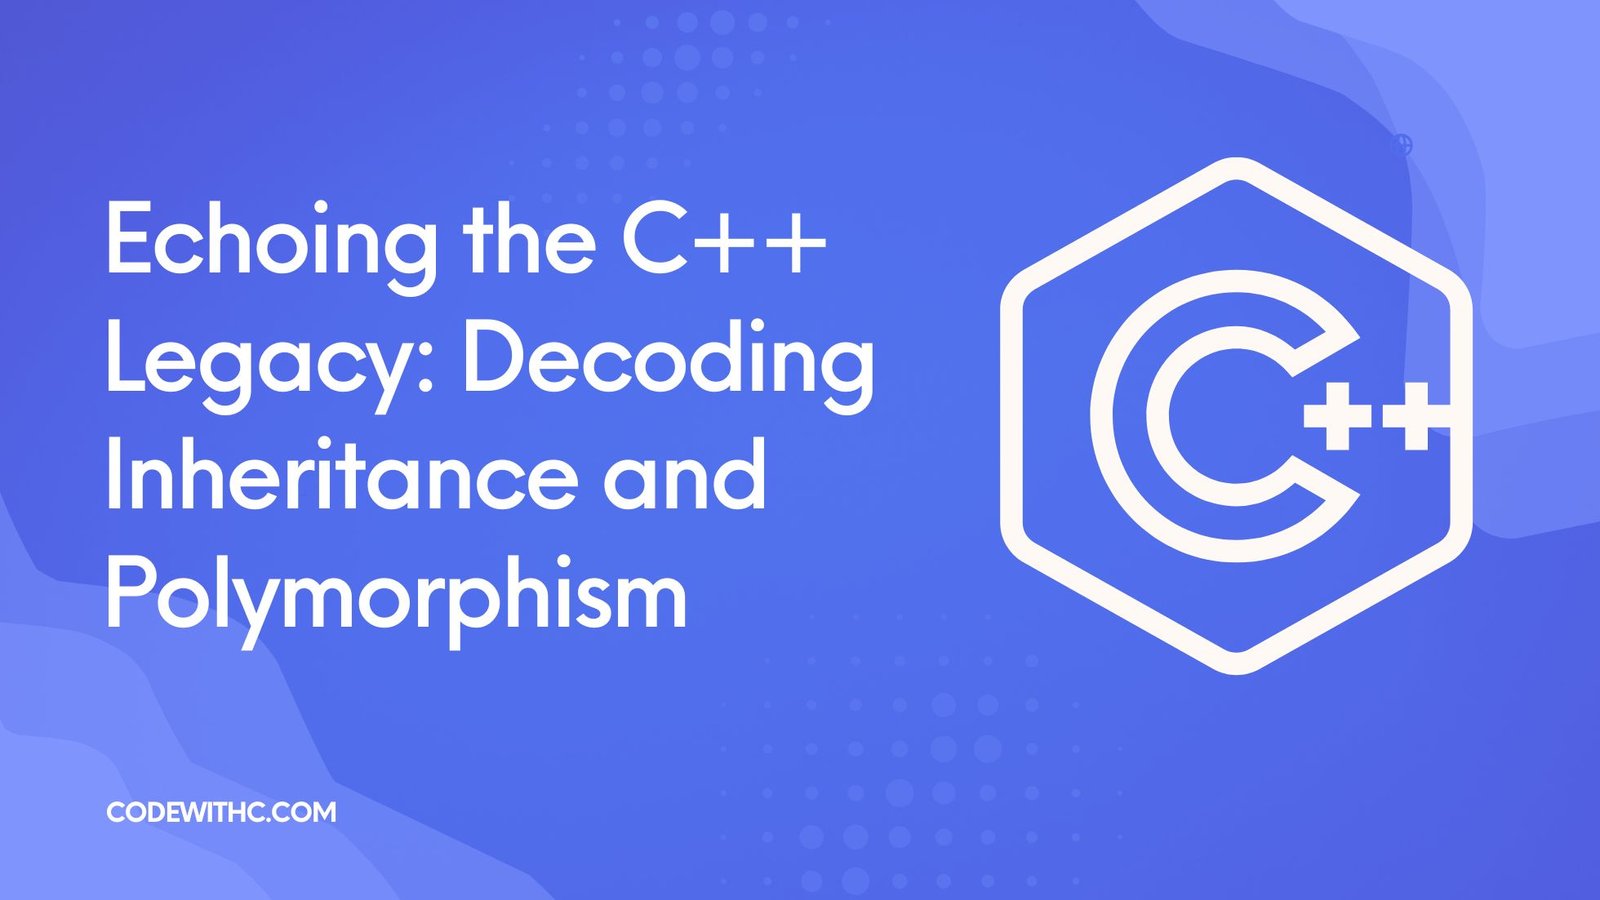 Echoing the C++ Legacy Decoding Inheritance and Polymorphism